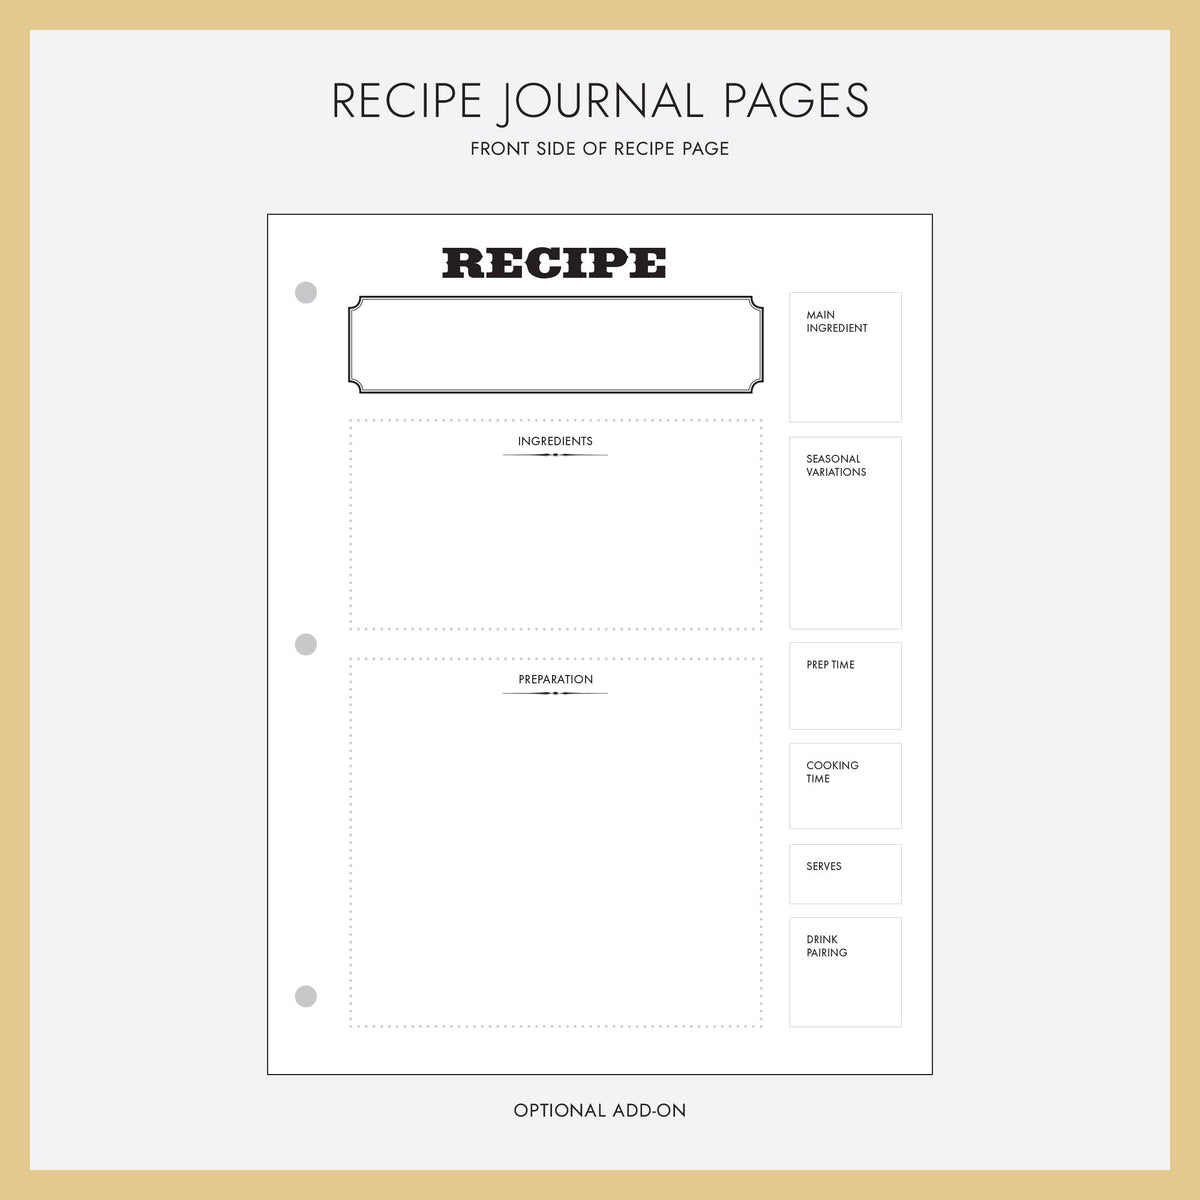 Recipe Journal Embossed with &quot;RECIPES&quot; covered with Pearl Leather